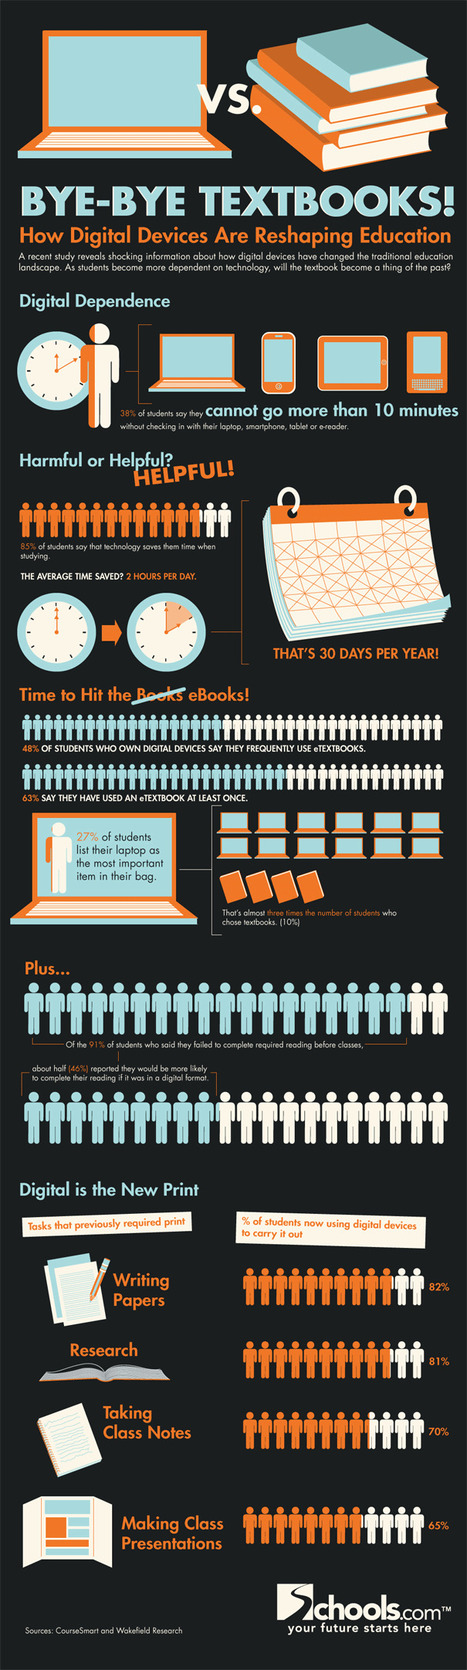 Goodbye Textbooks! Students Are Embracing the Move to Digital Learning [Infographic] | 21st Century Learning and Teaching | Scoop.it